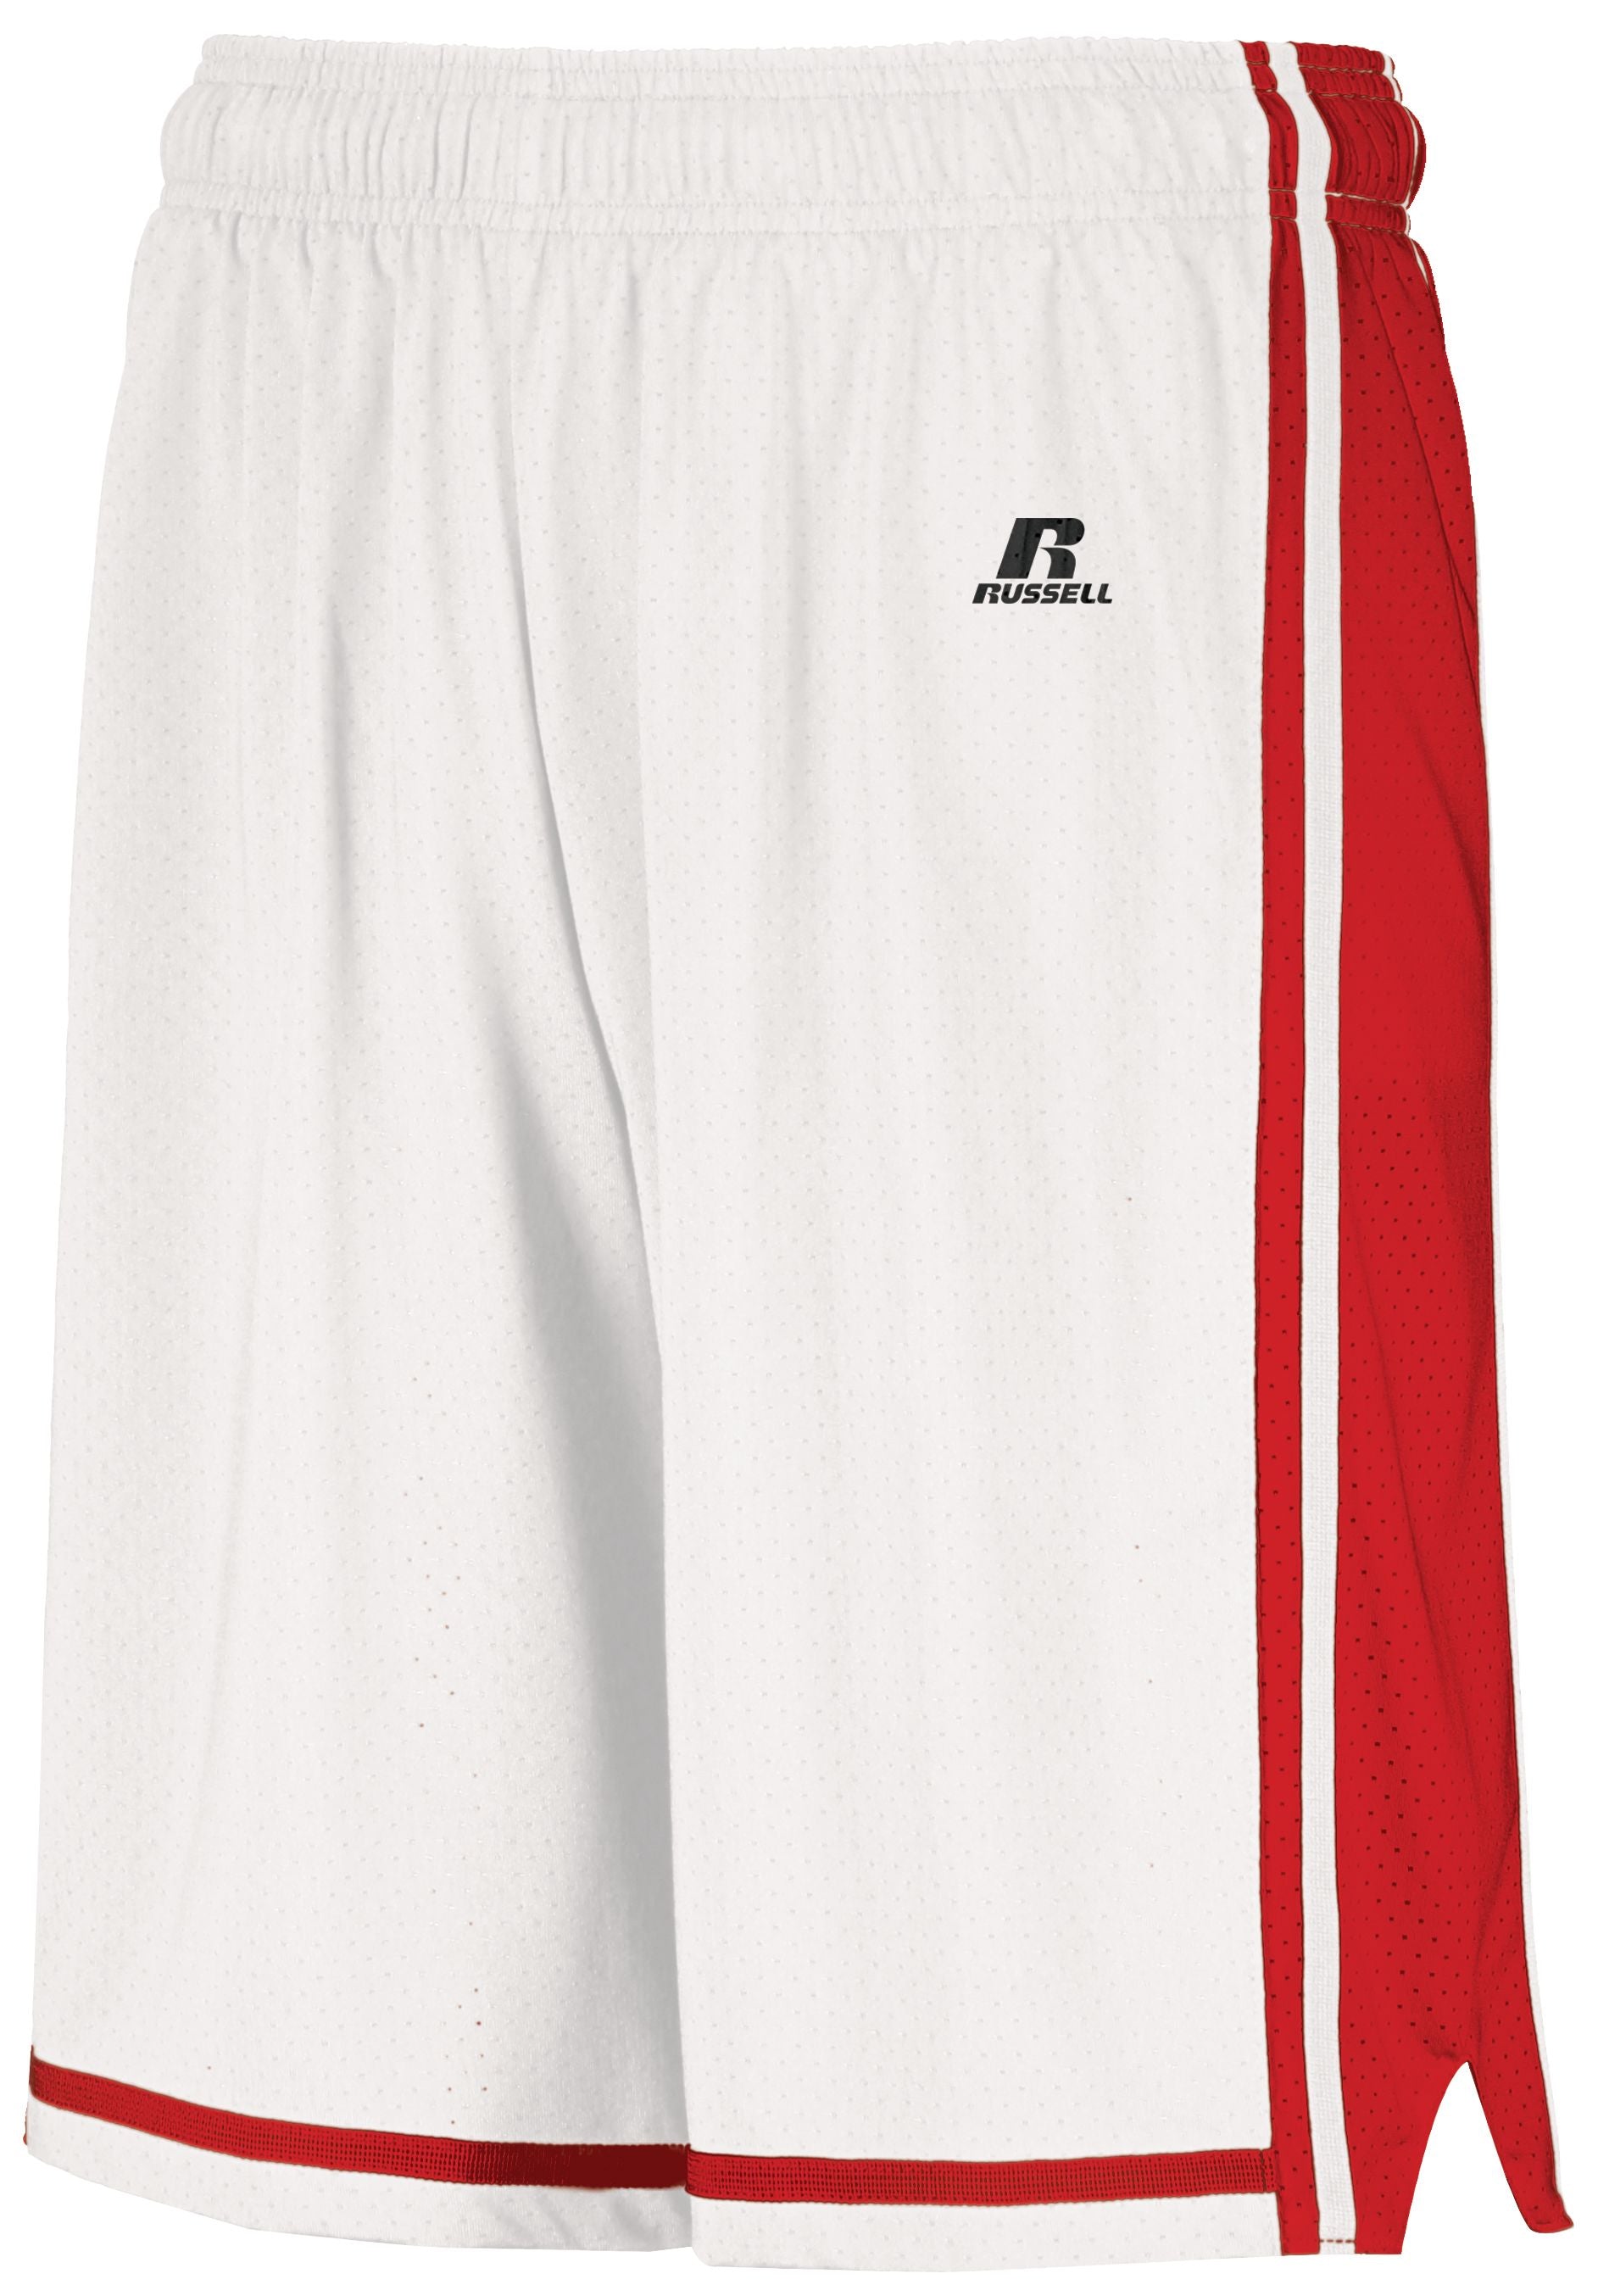 Russell Athletic Youth Legacy Basketball Shorts in White/True Red  -Part of the Youth, Youth-Shorts, Basketball, Russell-Athletic-Products, All-Sports, All-Sports-1 product lines at KanaleyCreations.com